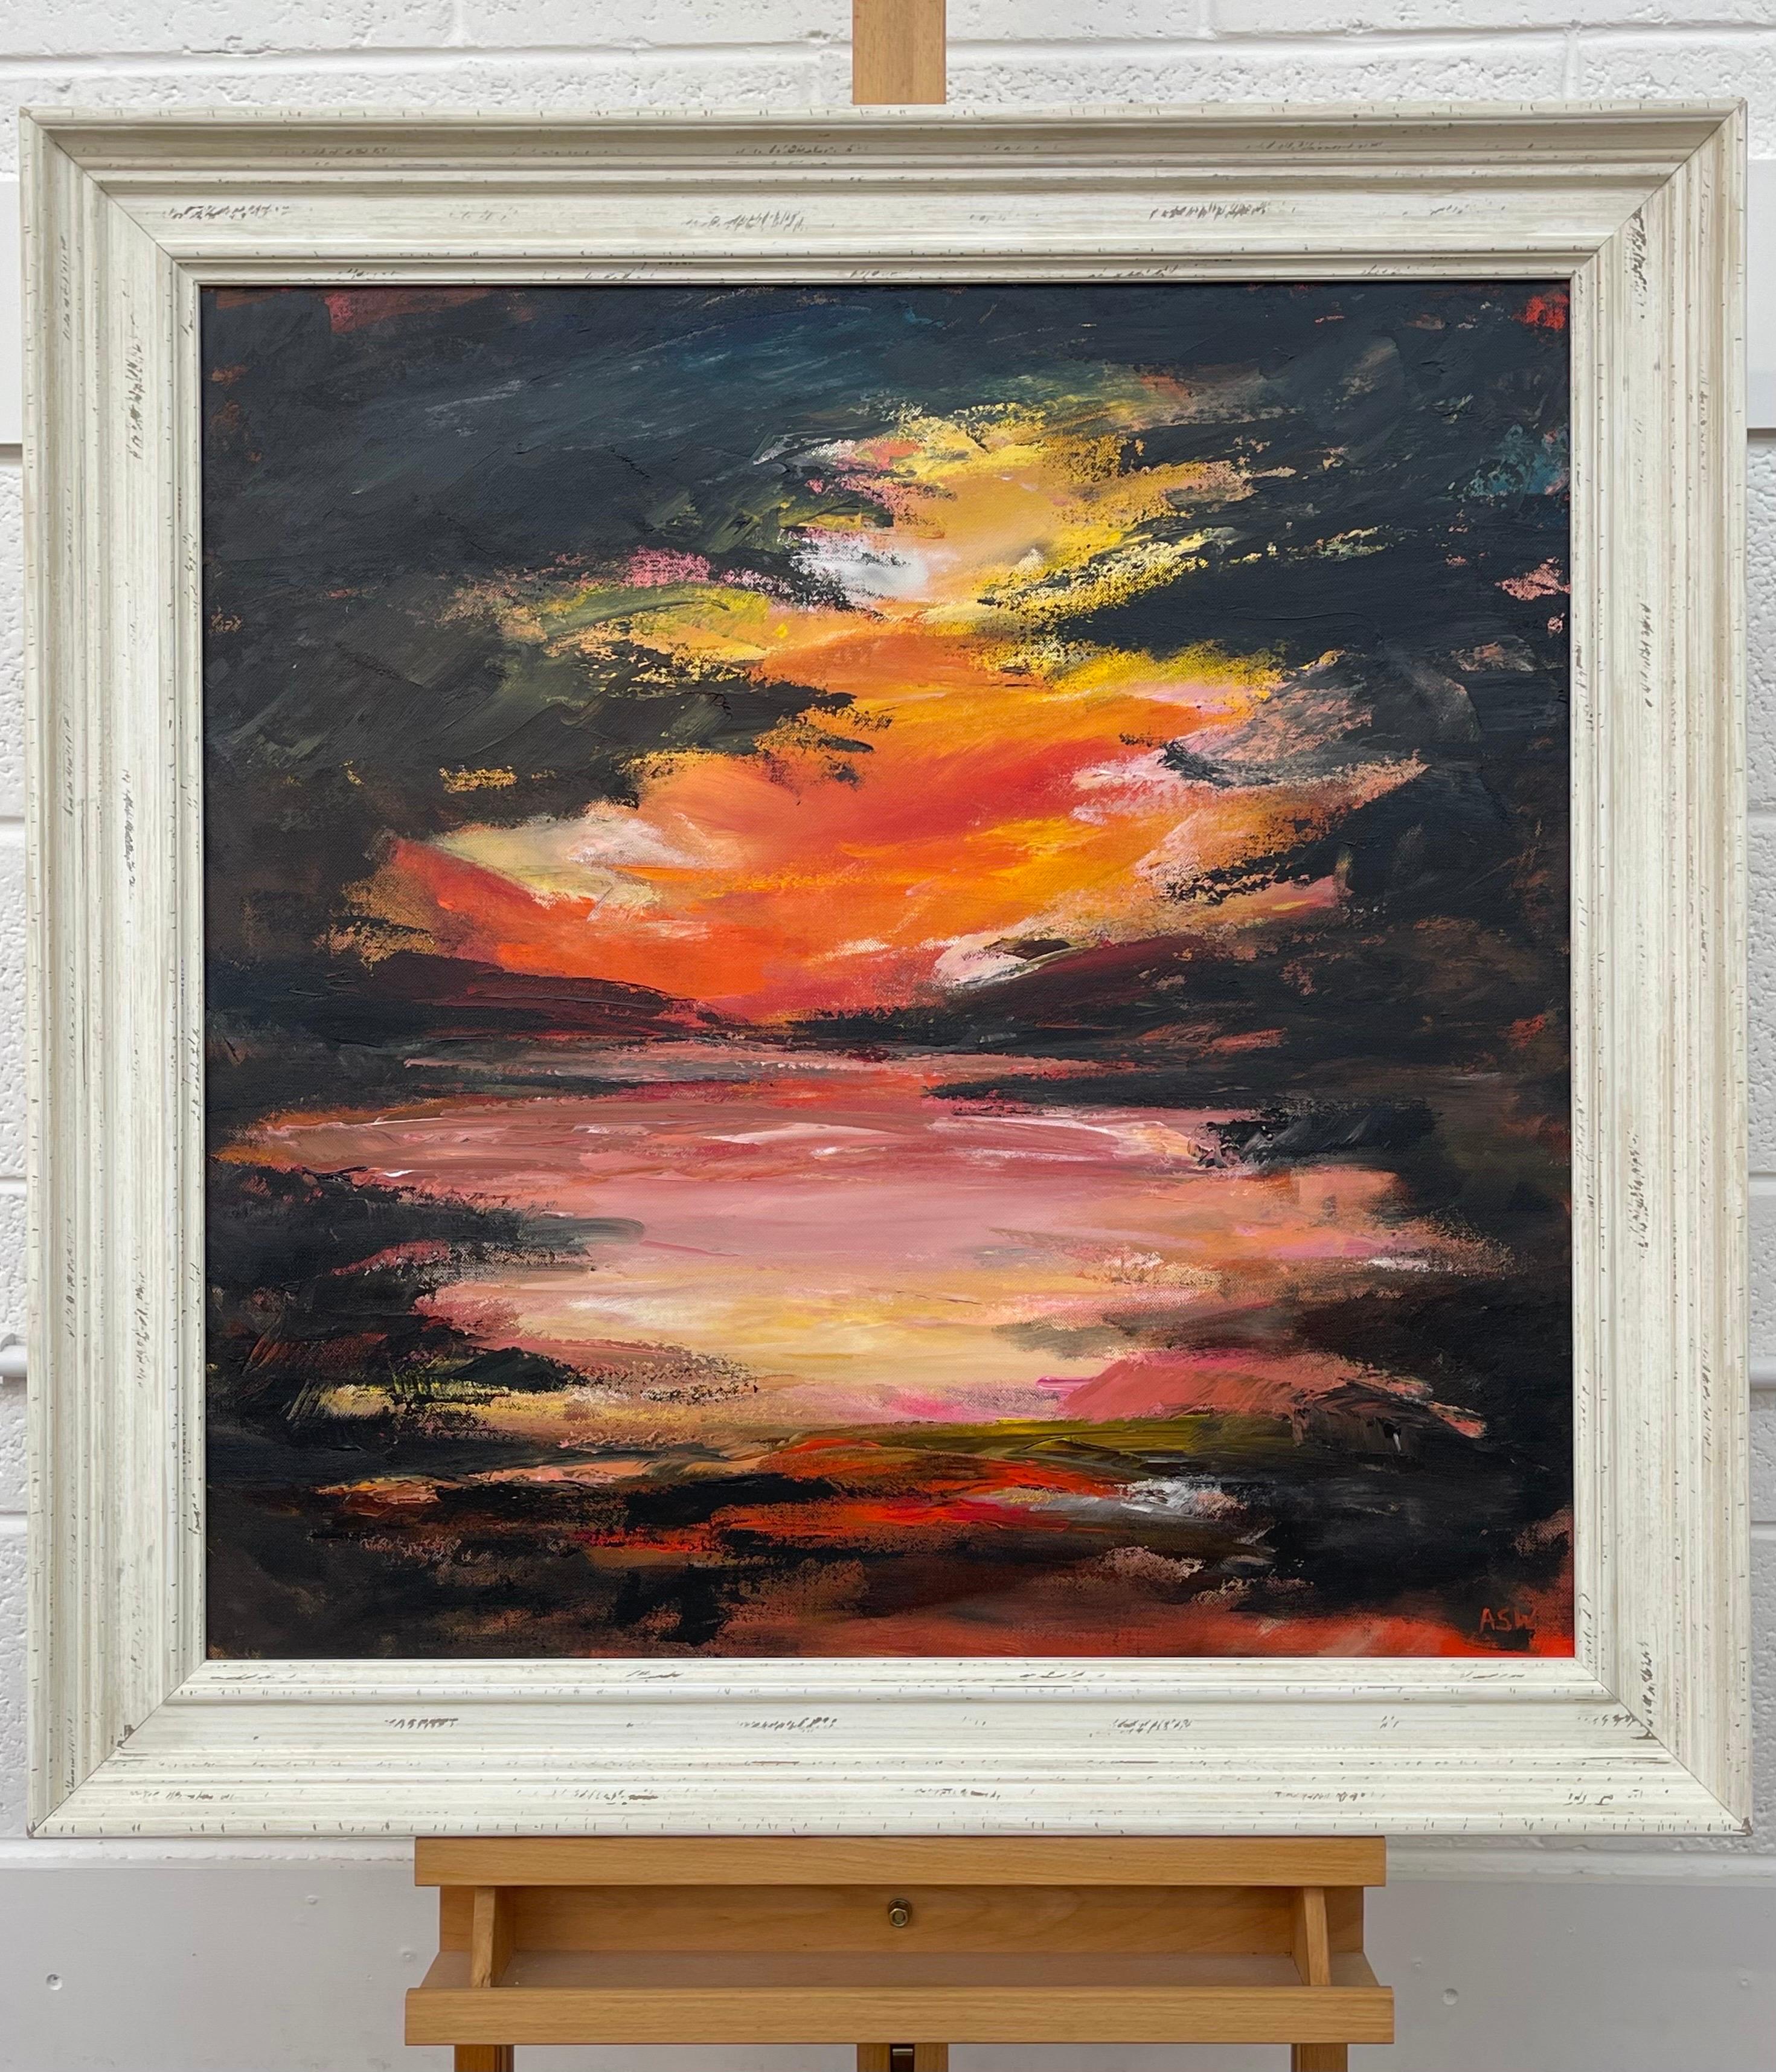 Black, Orange & Yellow Abstract Expressionist Landscape Painting by Leading Contemporary British Artist, Angela Wakefield. Deep in the forest, looking through the trees out onto a mountain lake scene at twilight, this atmospheric impressionistic